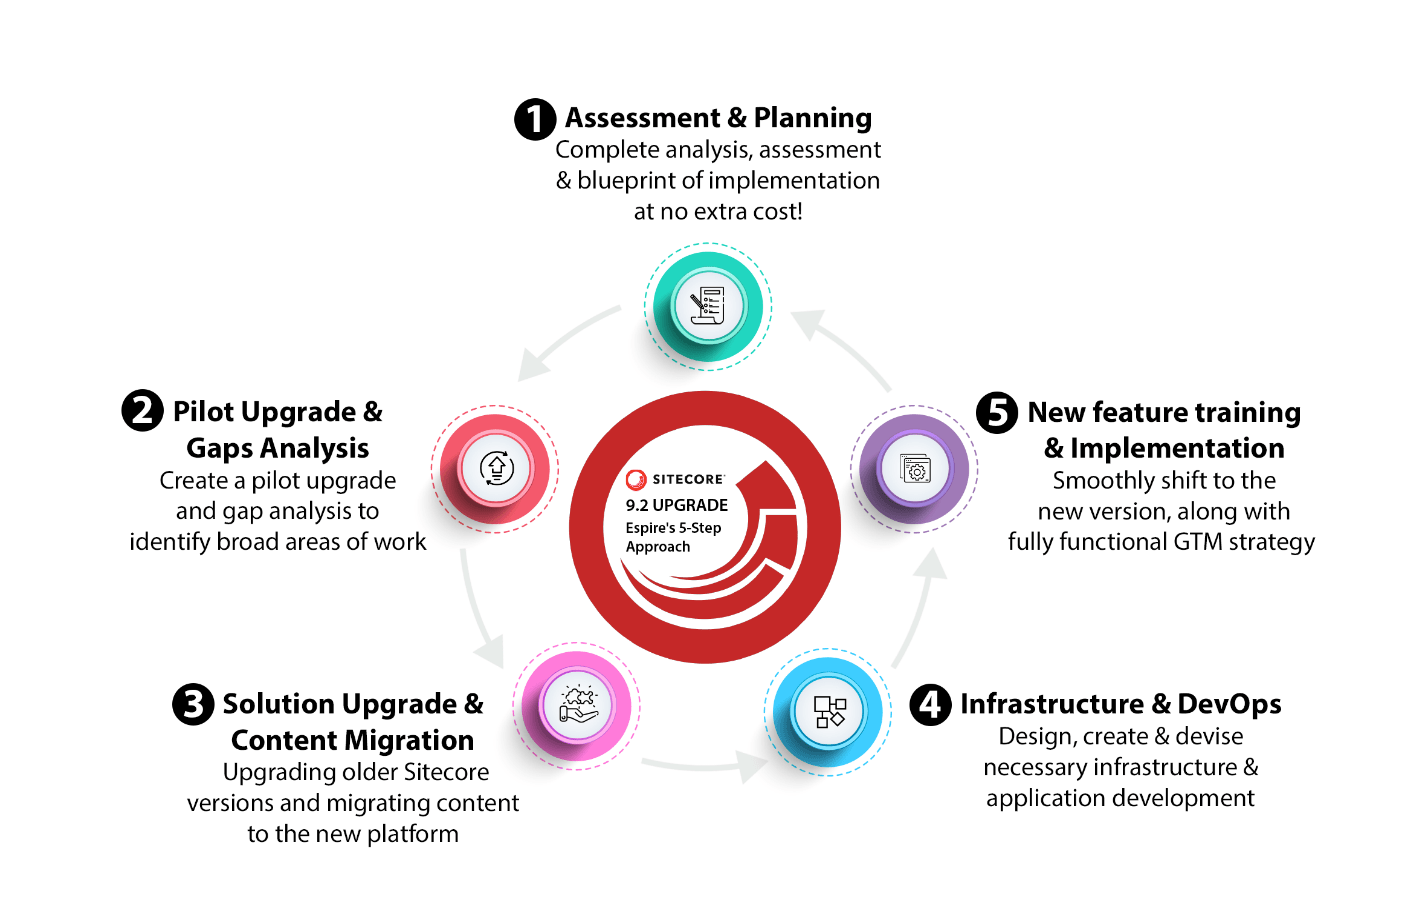 Espire’s 5 Step Approach to Sitecore 9.2 Upgrade